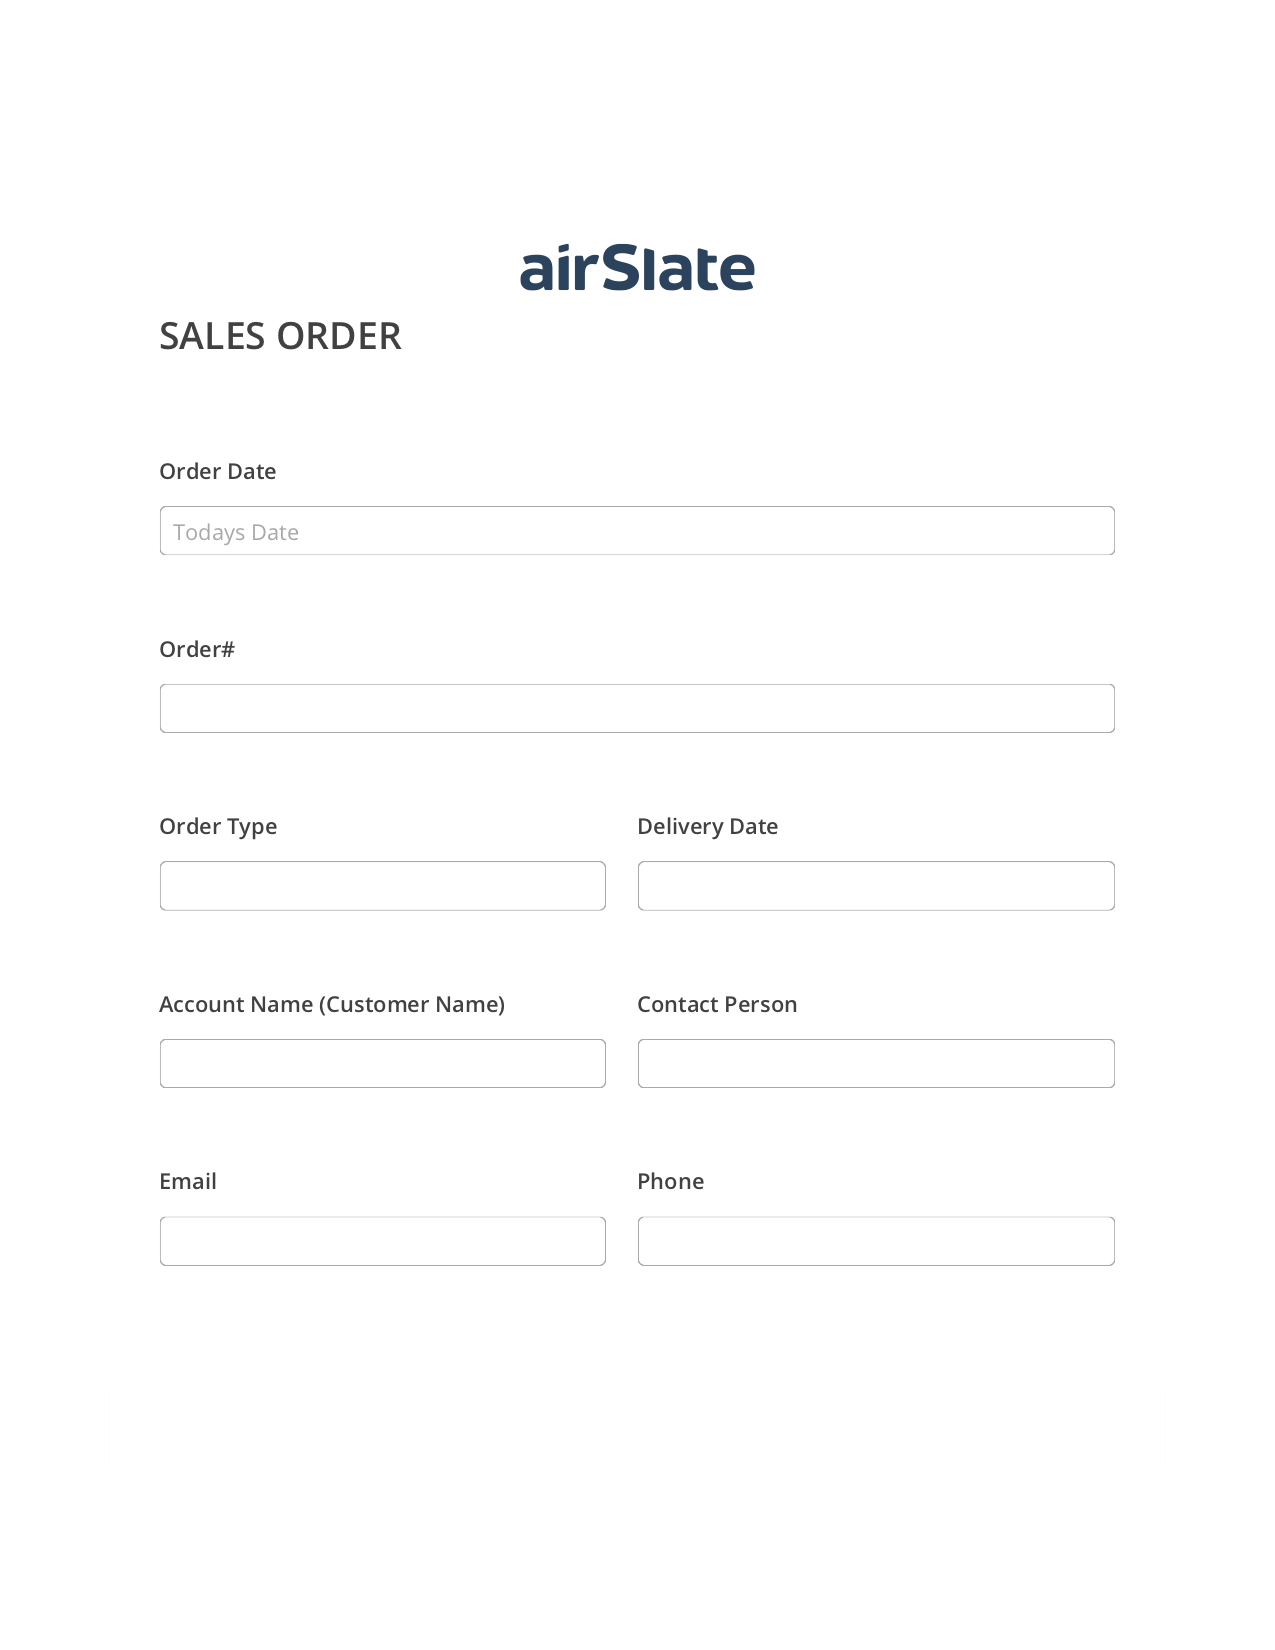 Sales Order Flow Pre-fill Slate from MS Dynamics 365 Records